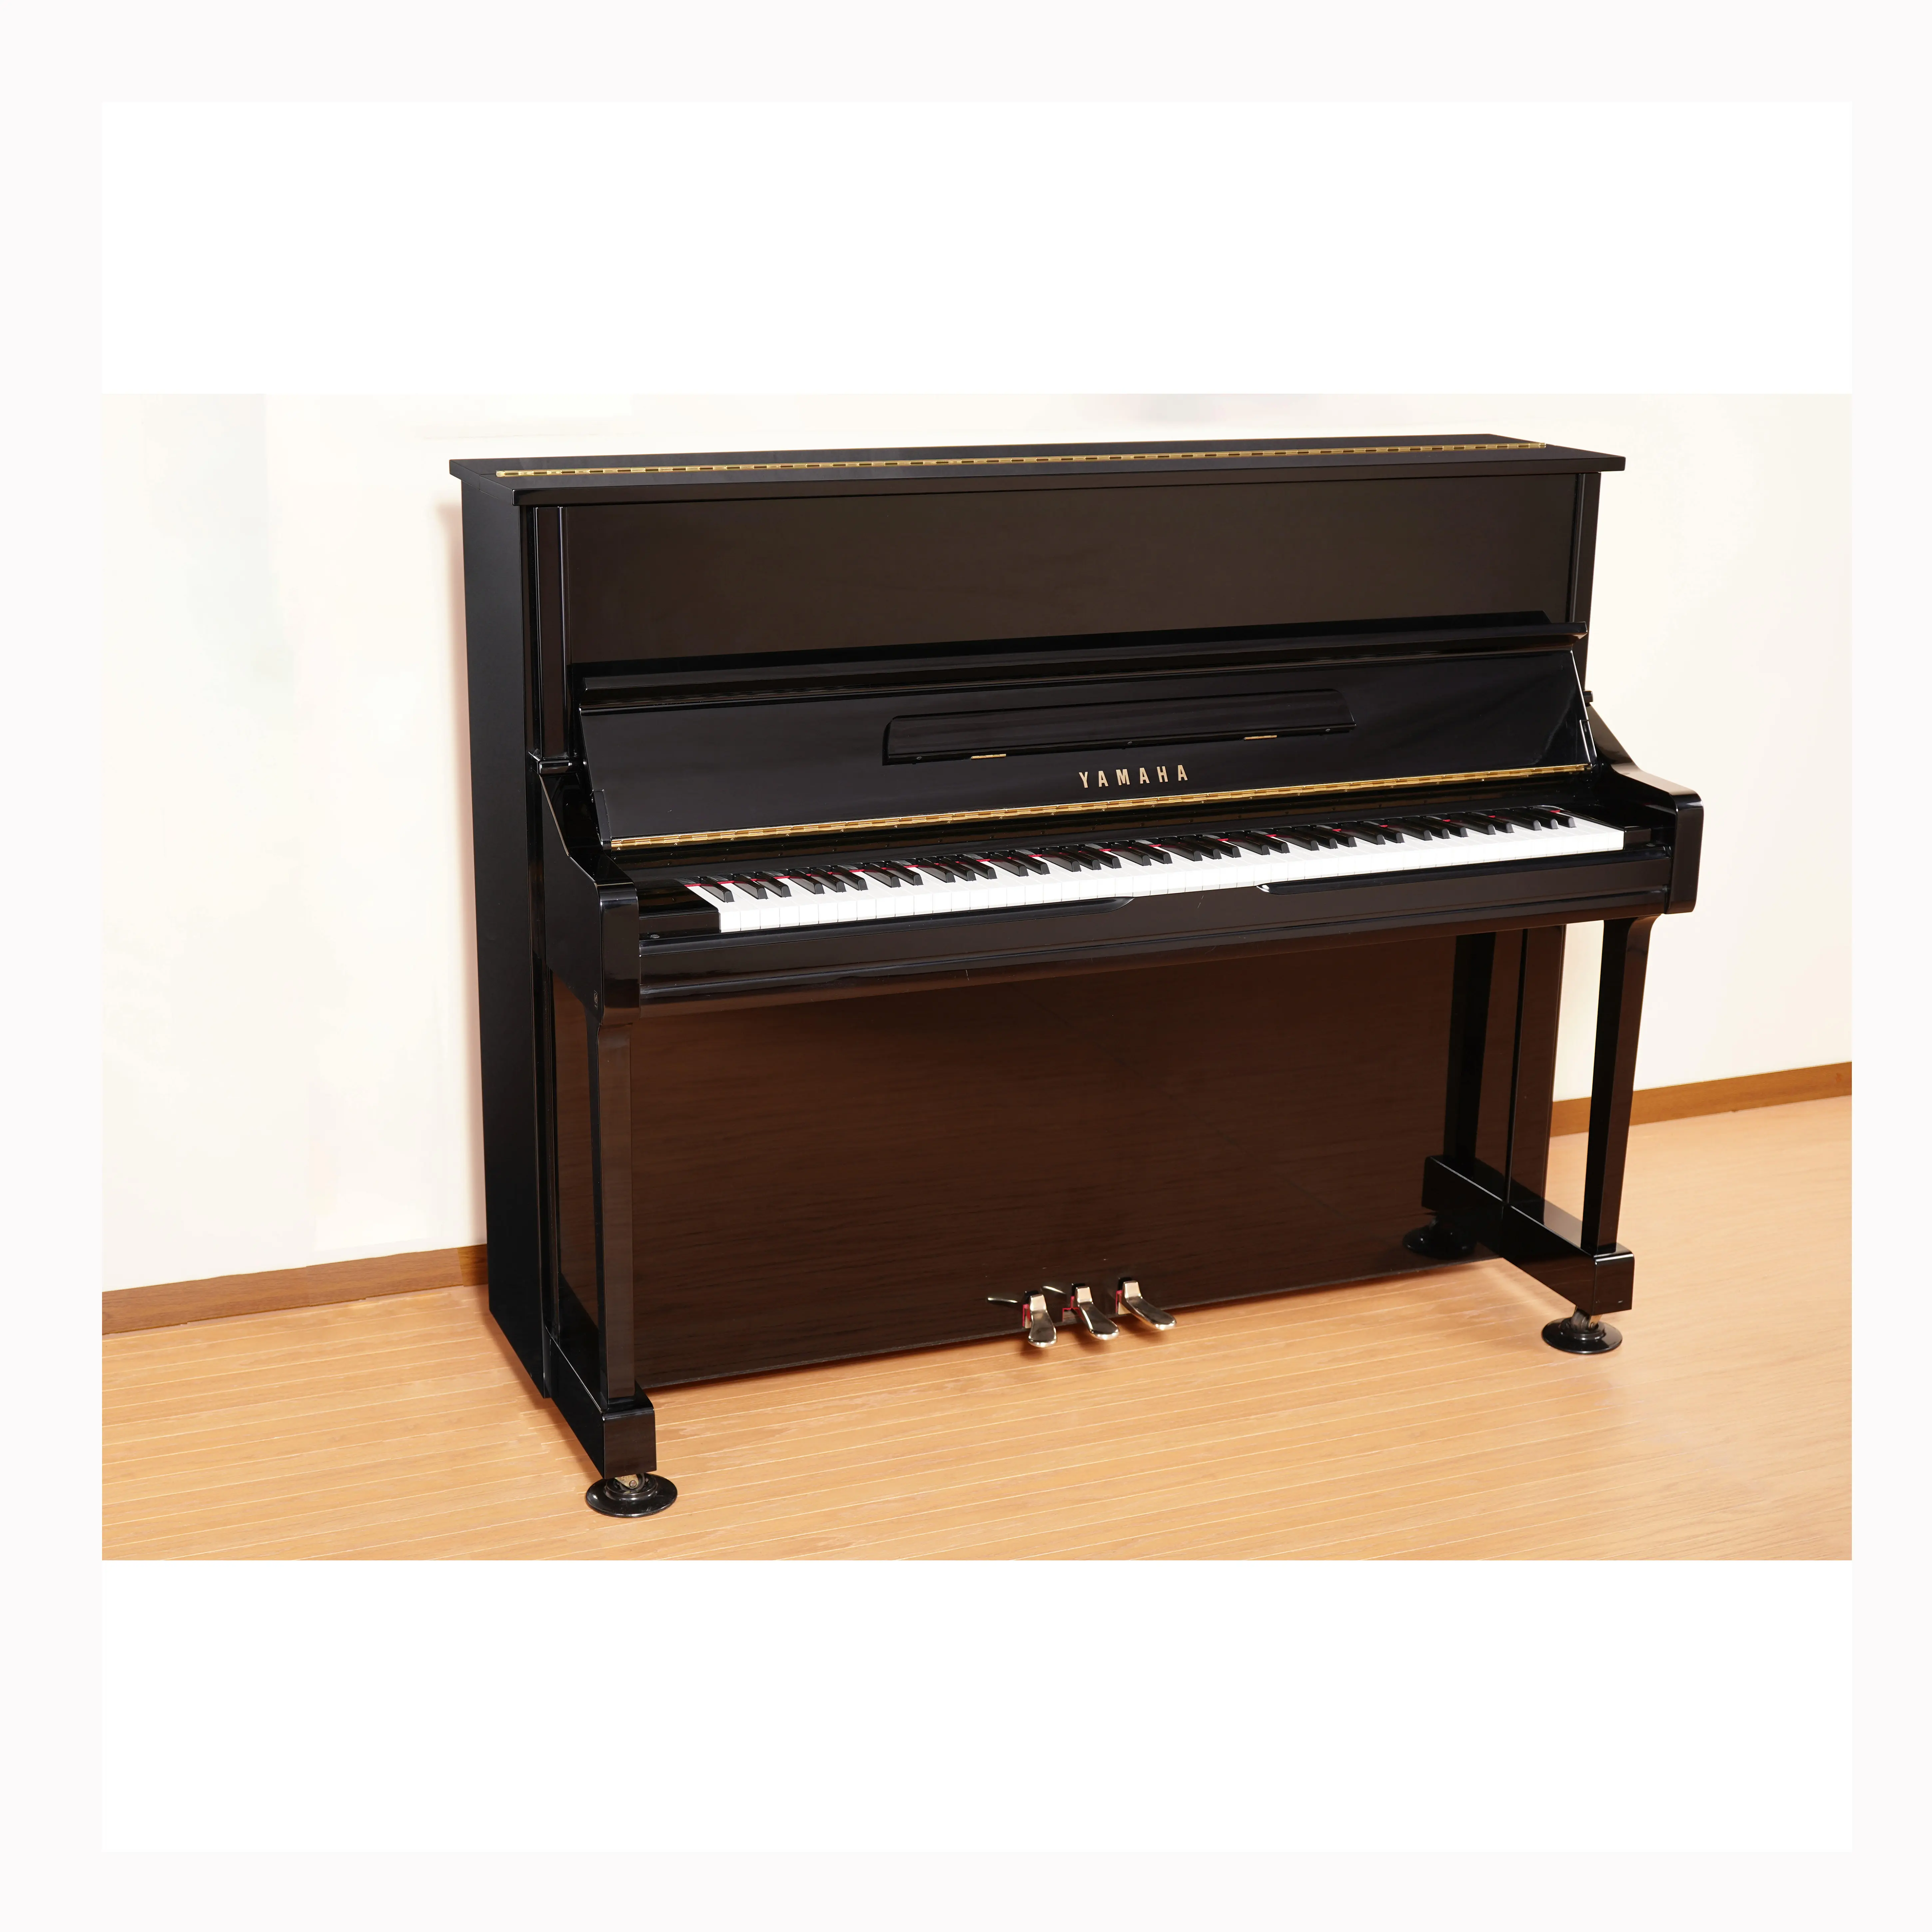 Japan manufactured by YAMAHA used music instruments second hand mechanical piano